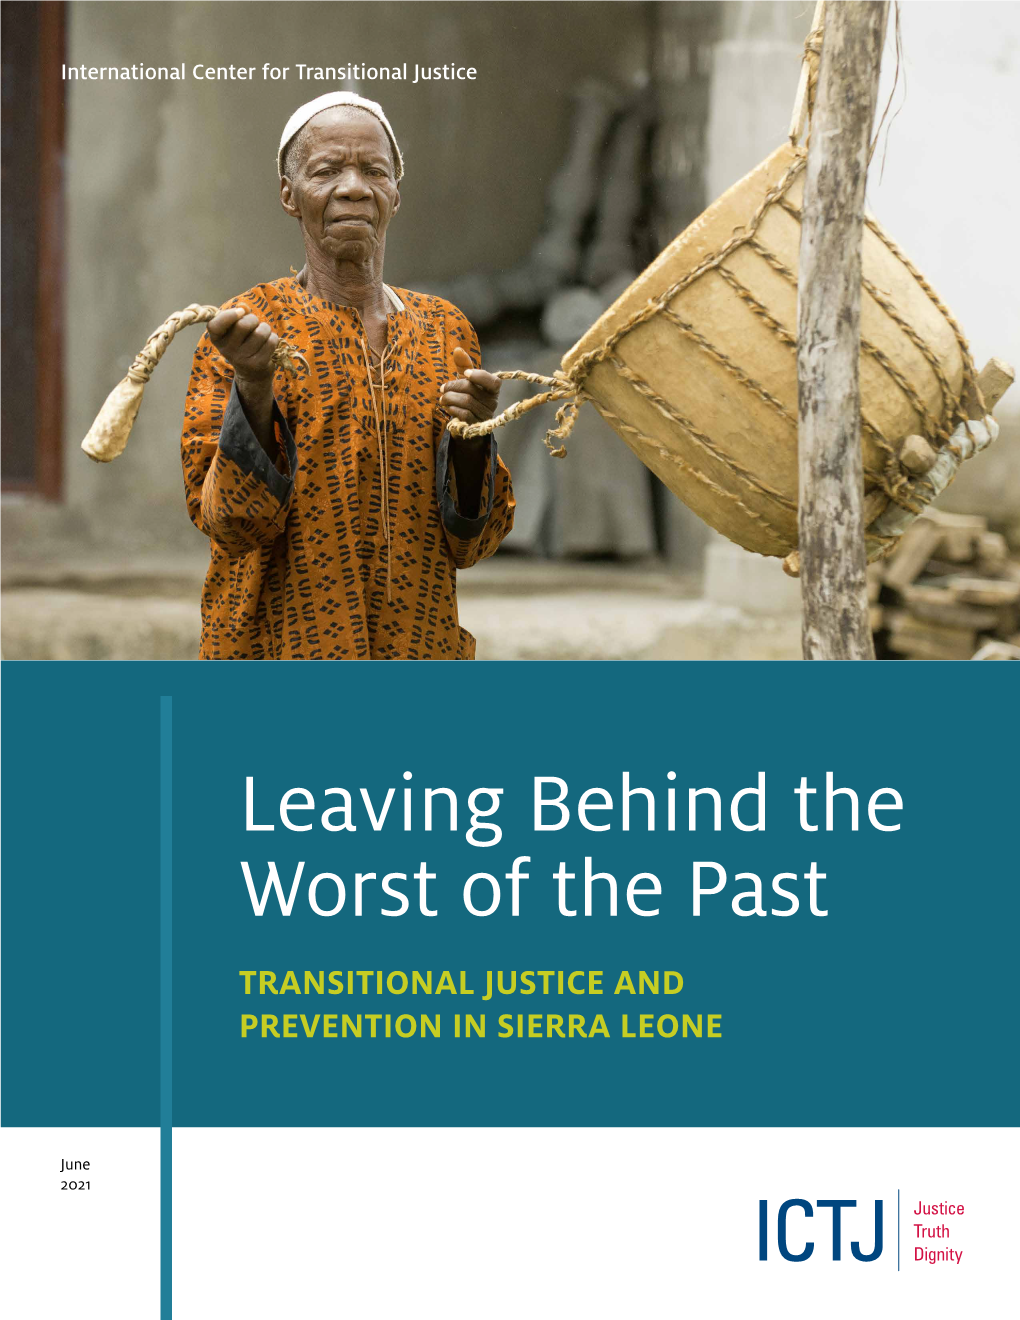 Download the Case Study Report on Prevention in Sierra Leone Here